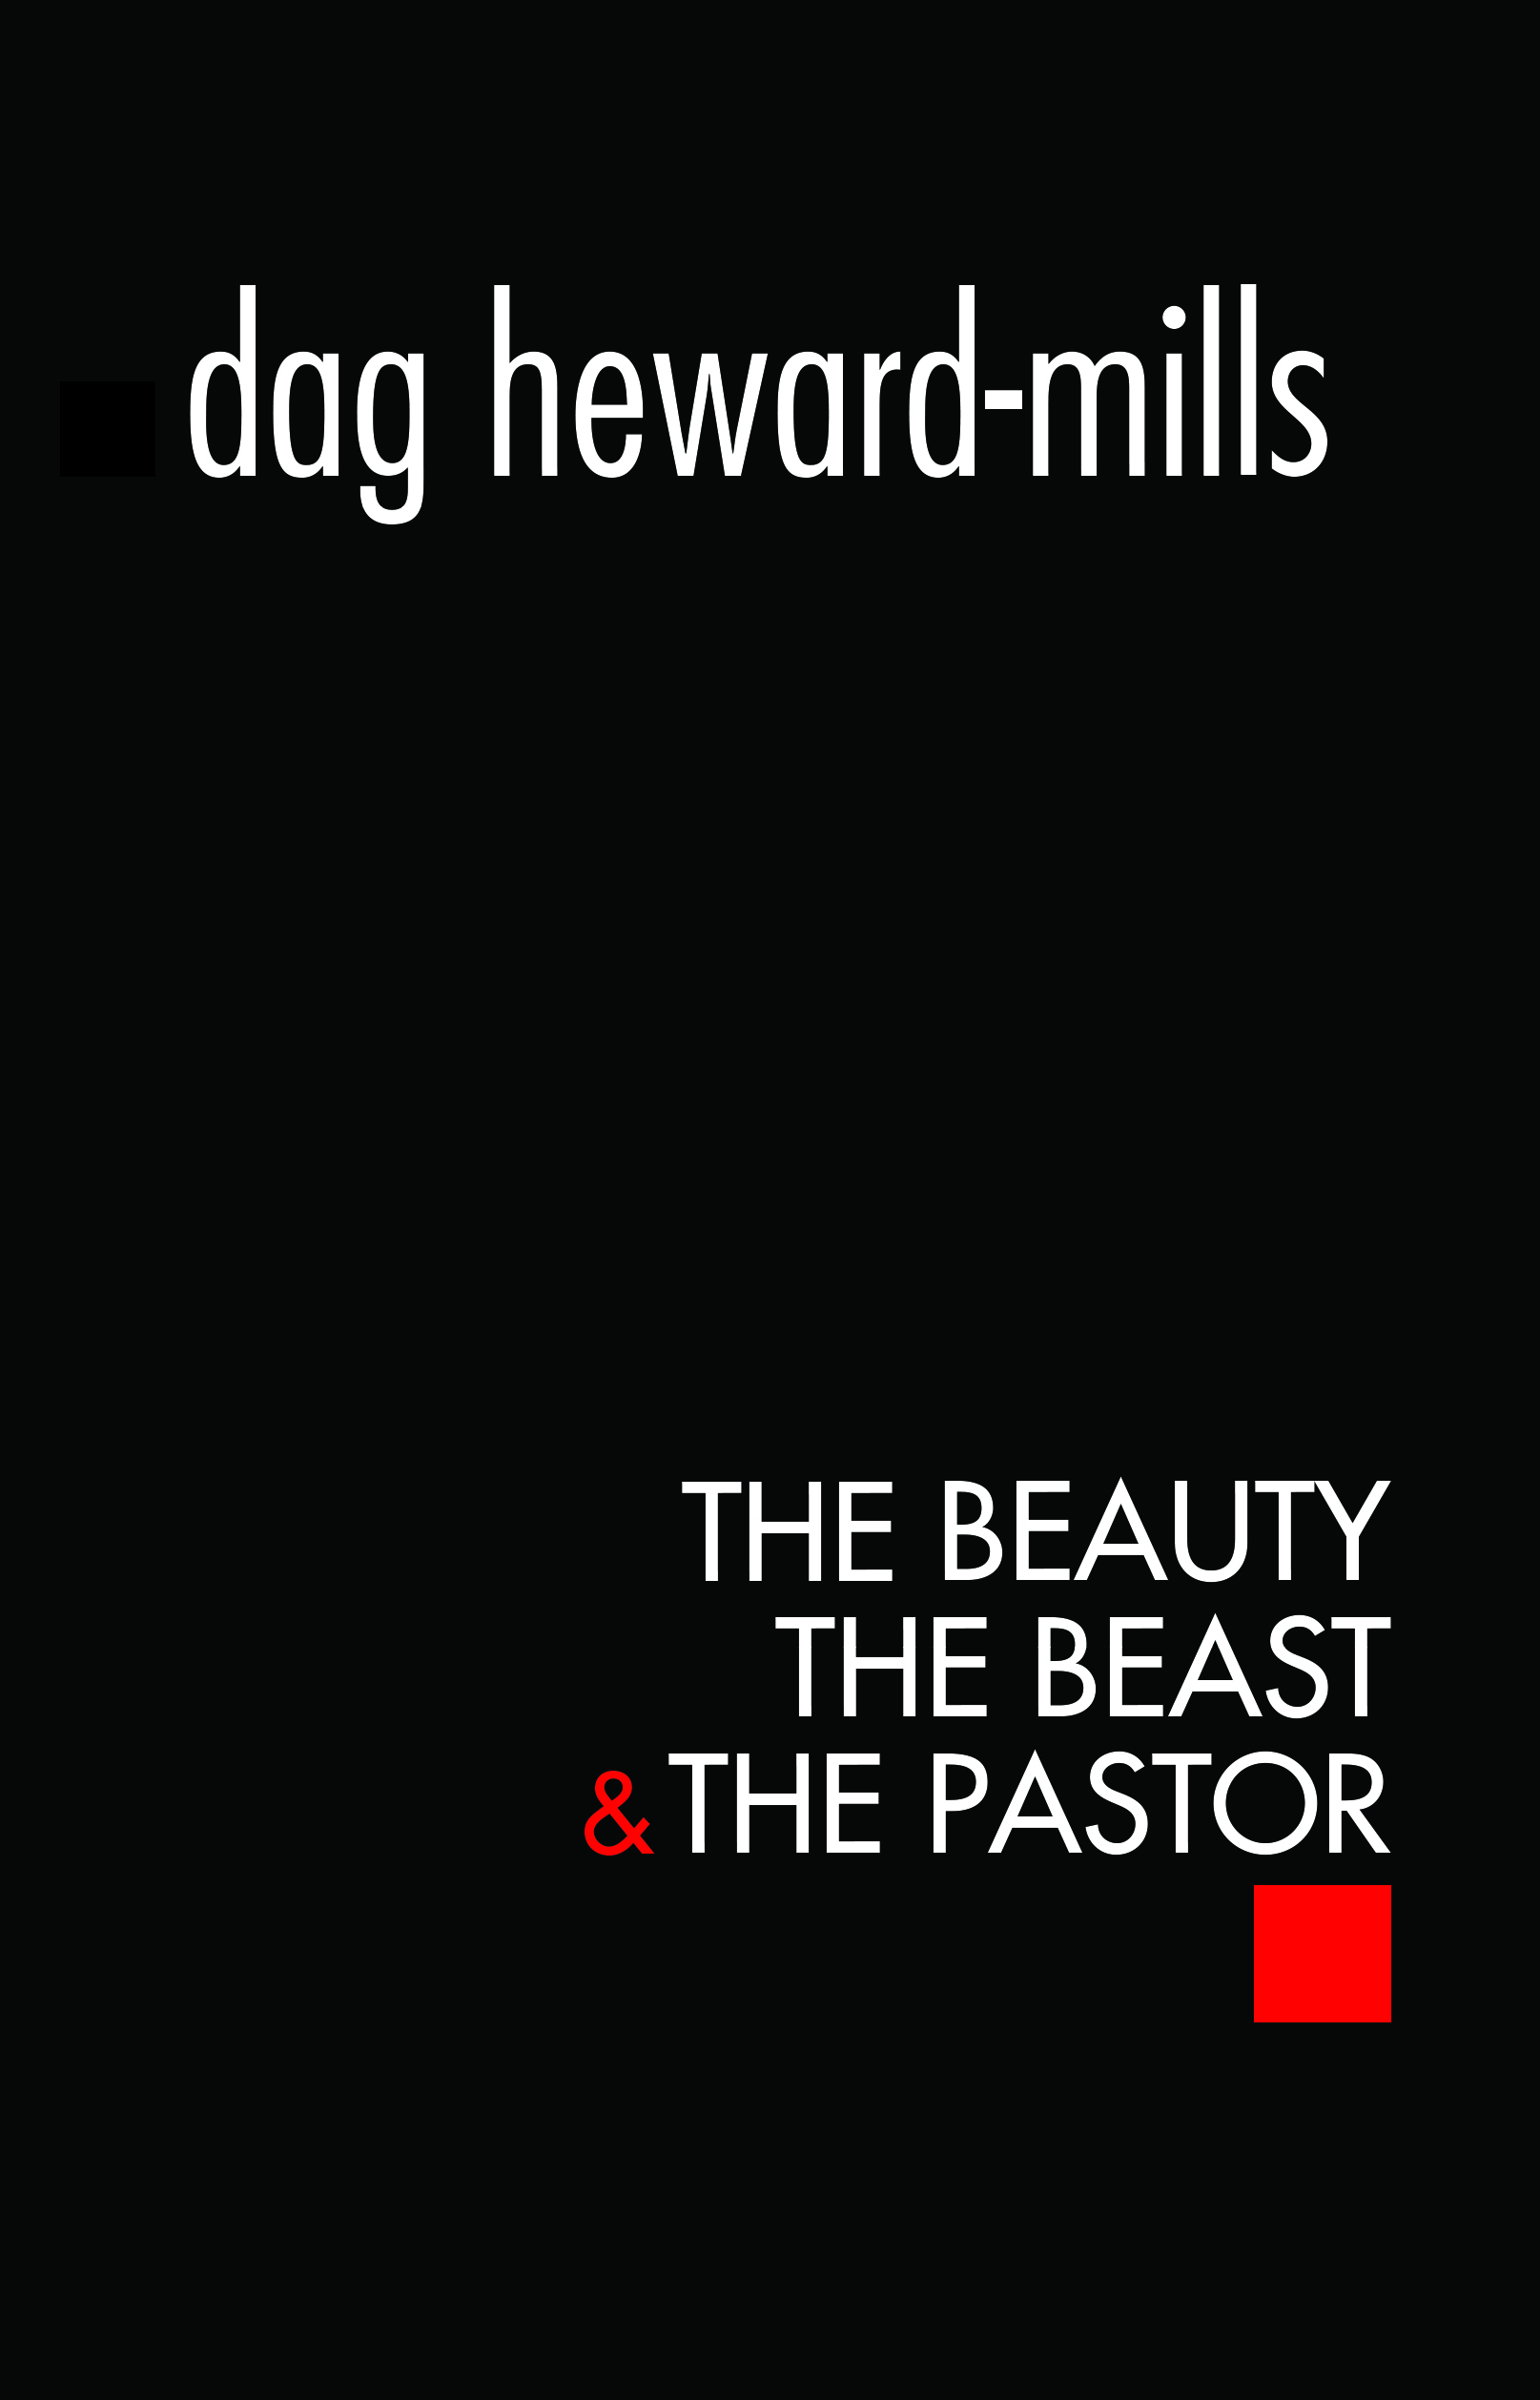 Beauty, Beast and Pastor by Dag Heward-Mills